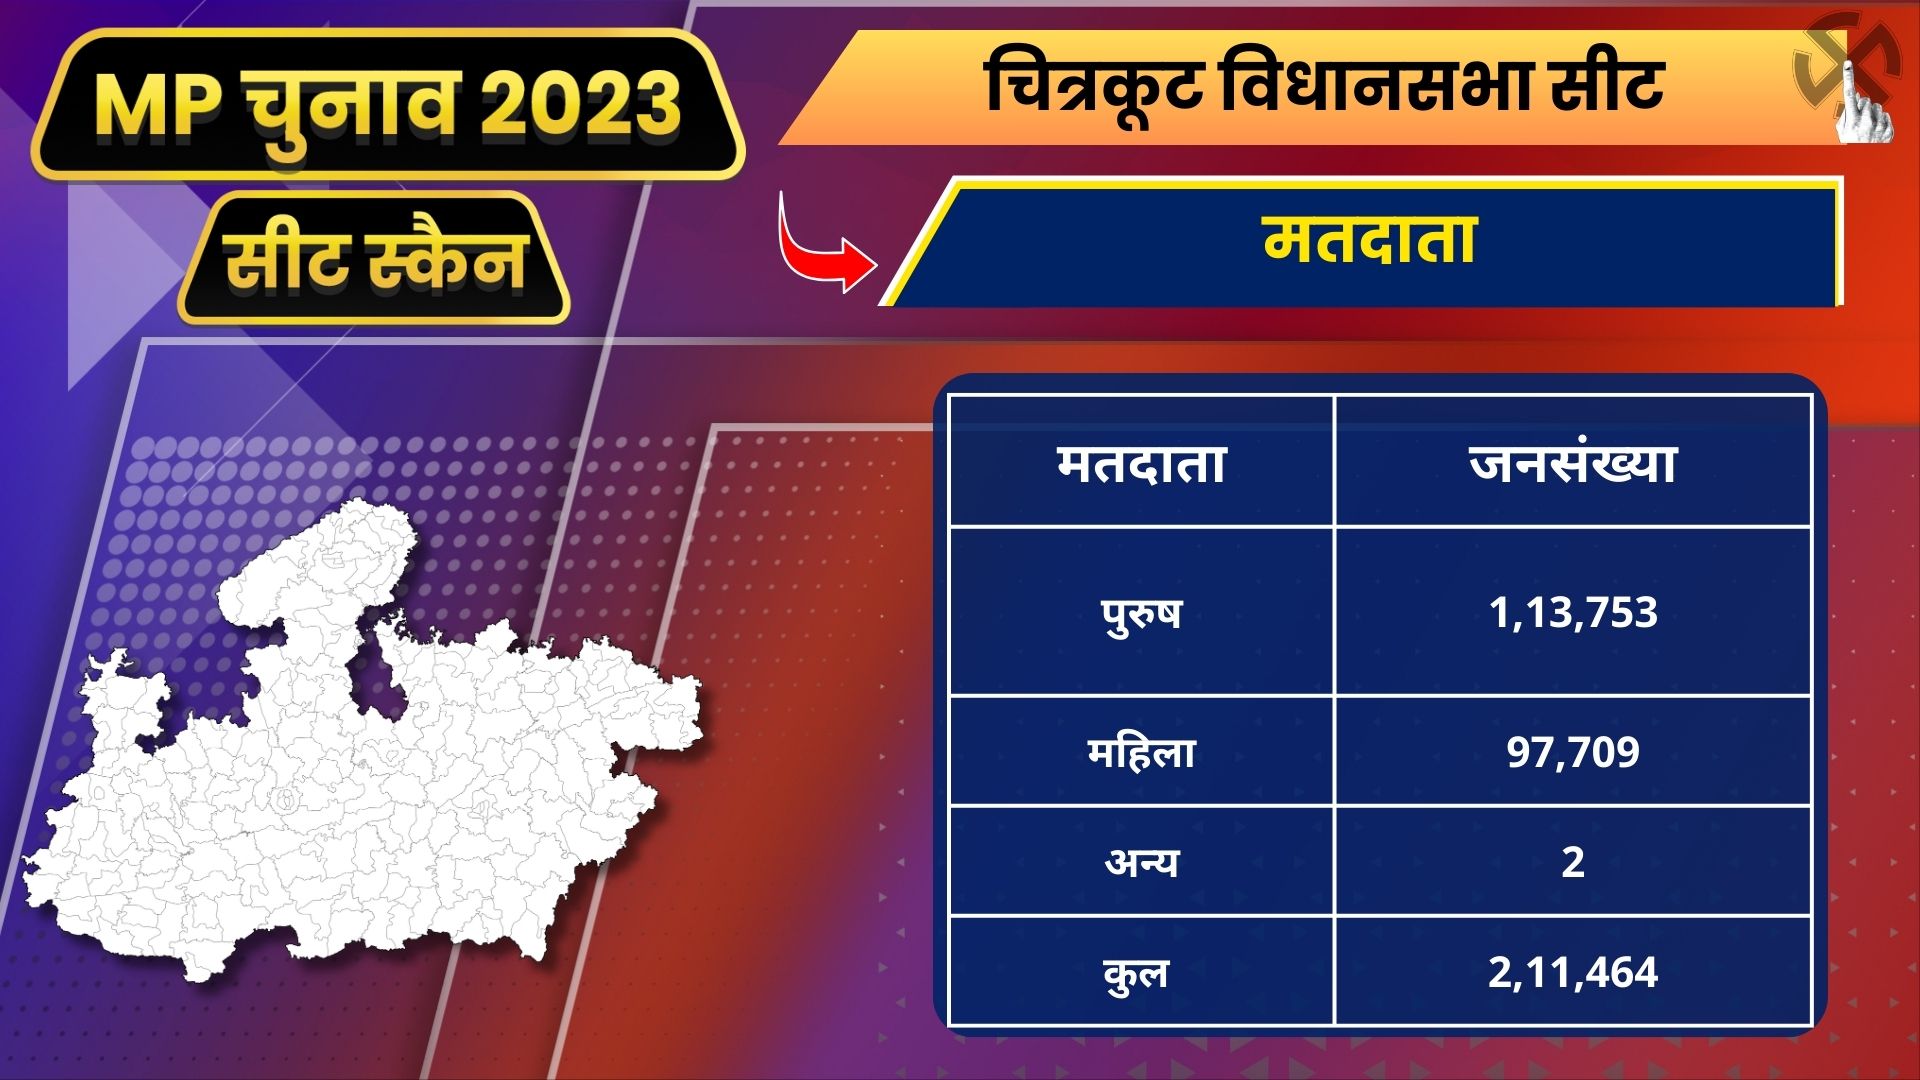 Number of voters in Chitrakoot